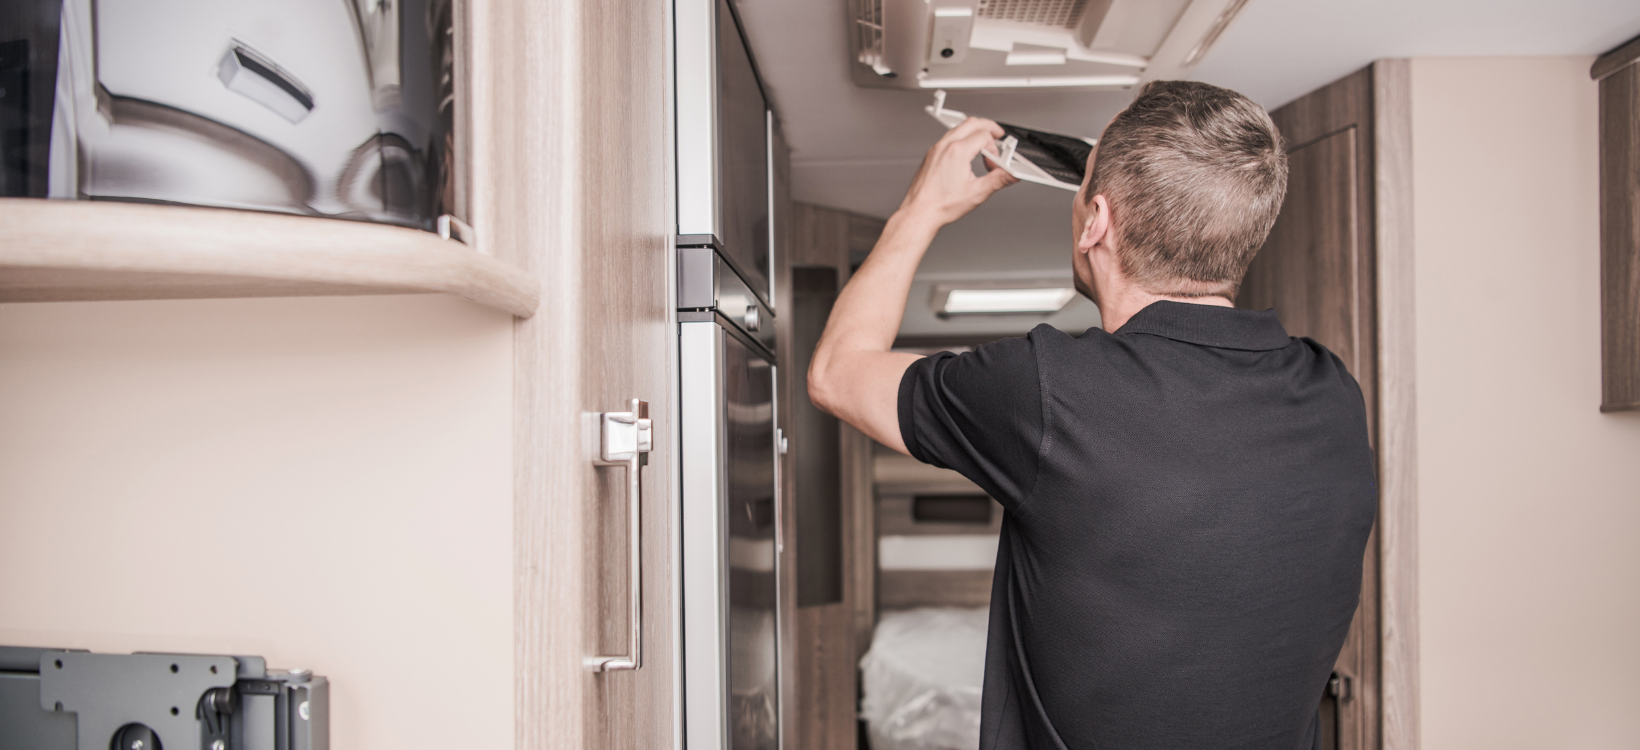 Getting an independent inspection is useful when buying an RV from a private seller